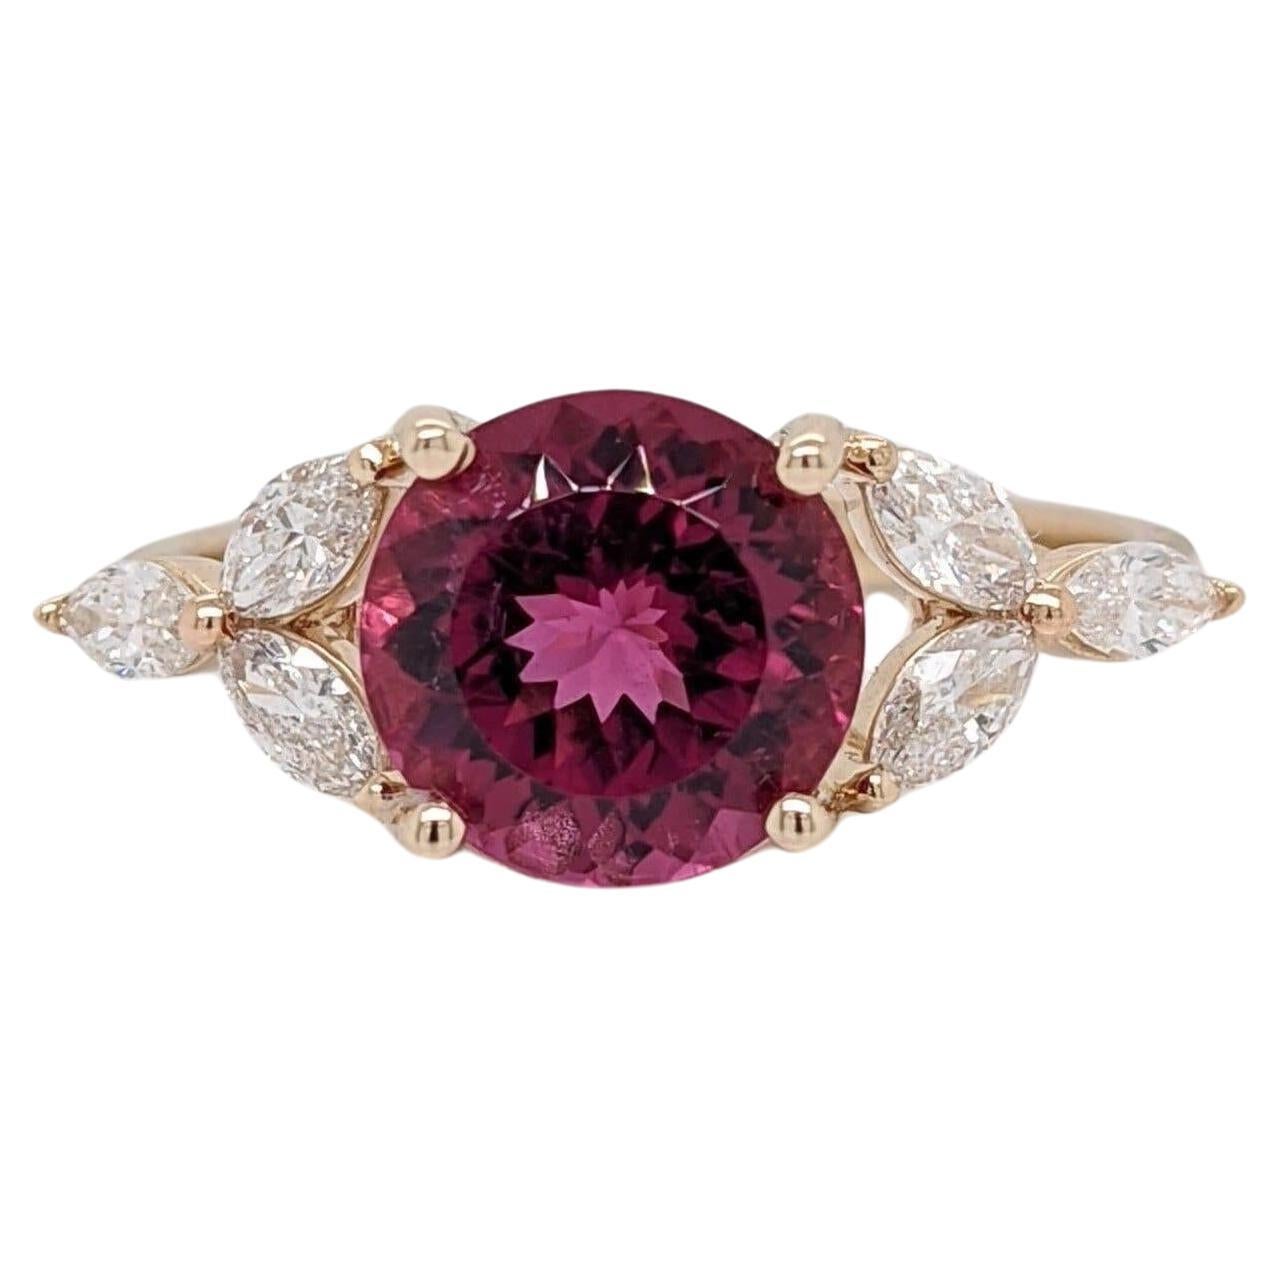 2ct Rubellite Tourmaline Ring w Earth Mined Diamonds in Solid 14k Gold Round 8mm For Sale